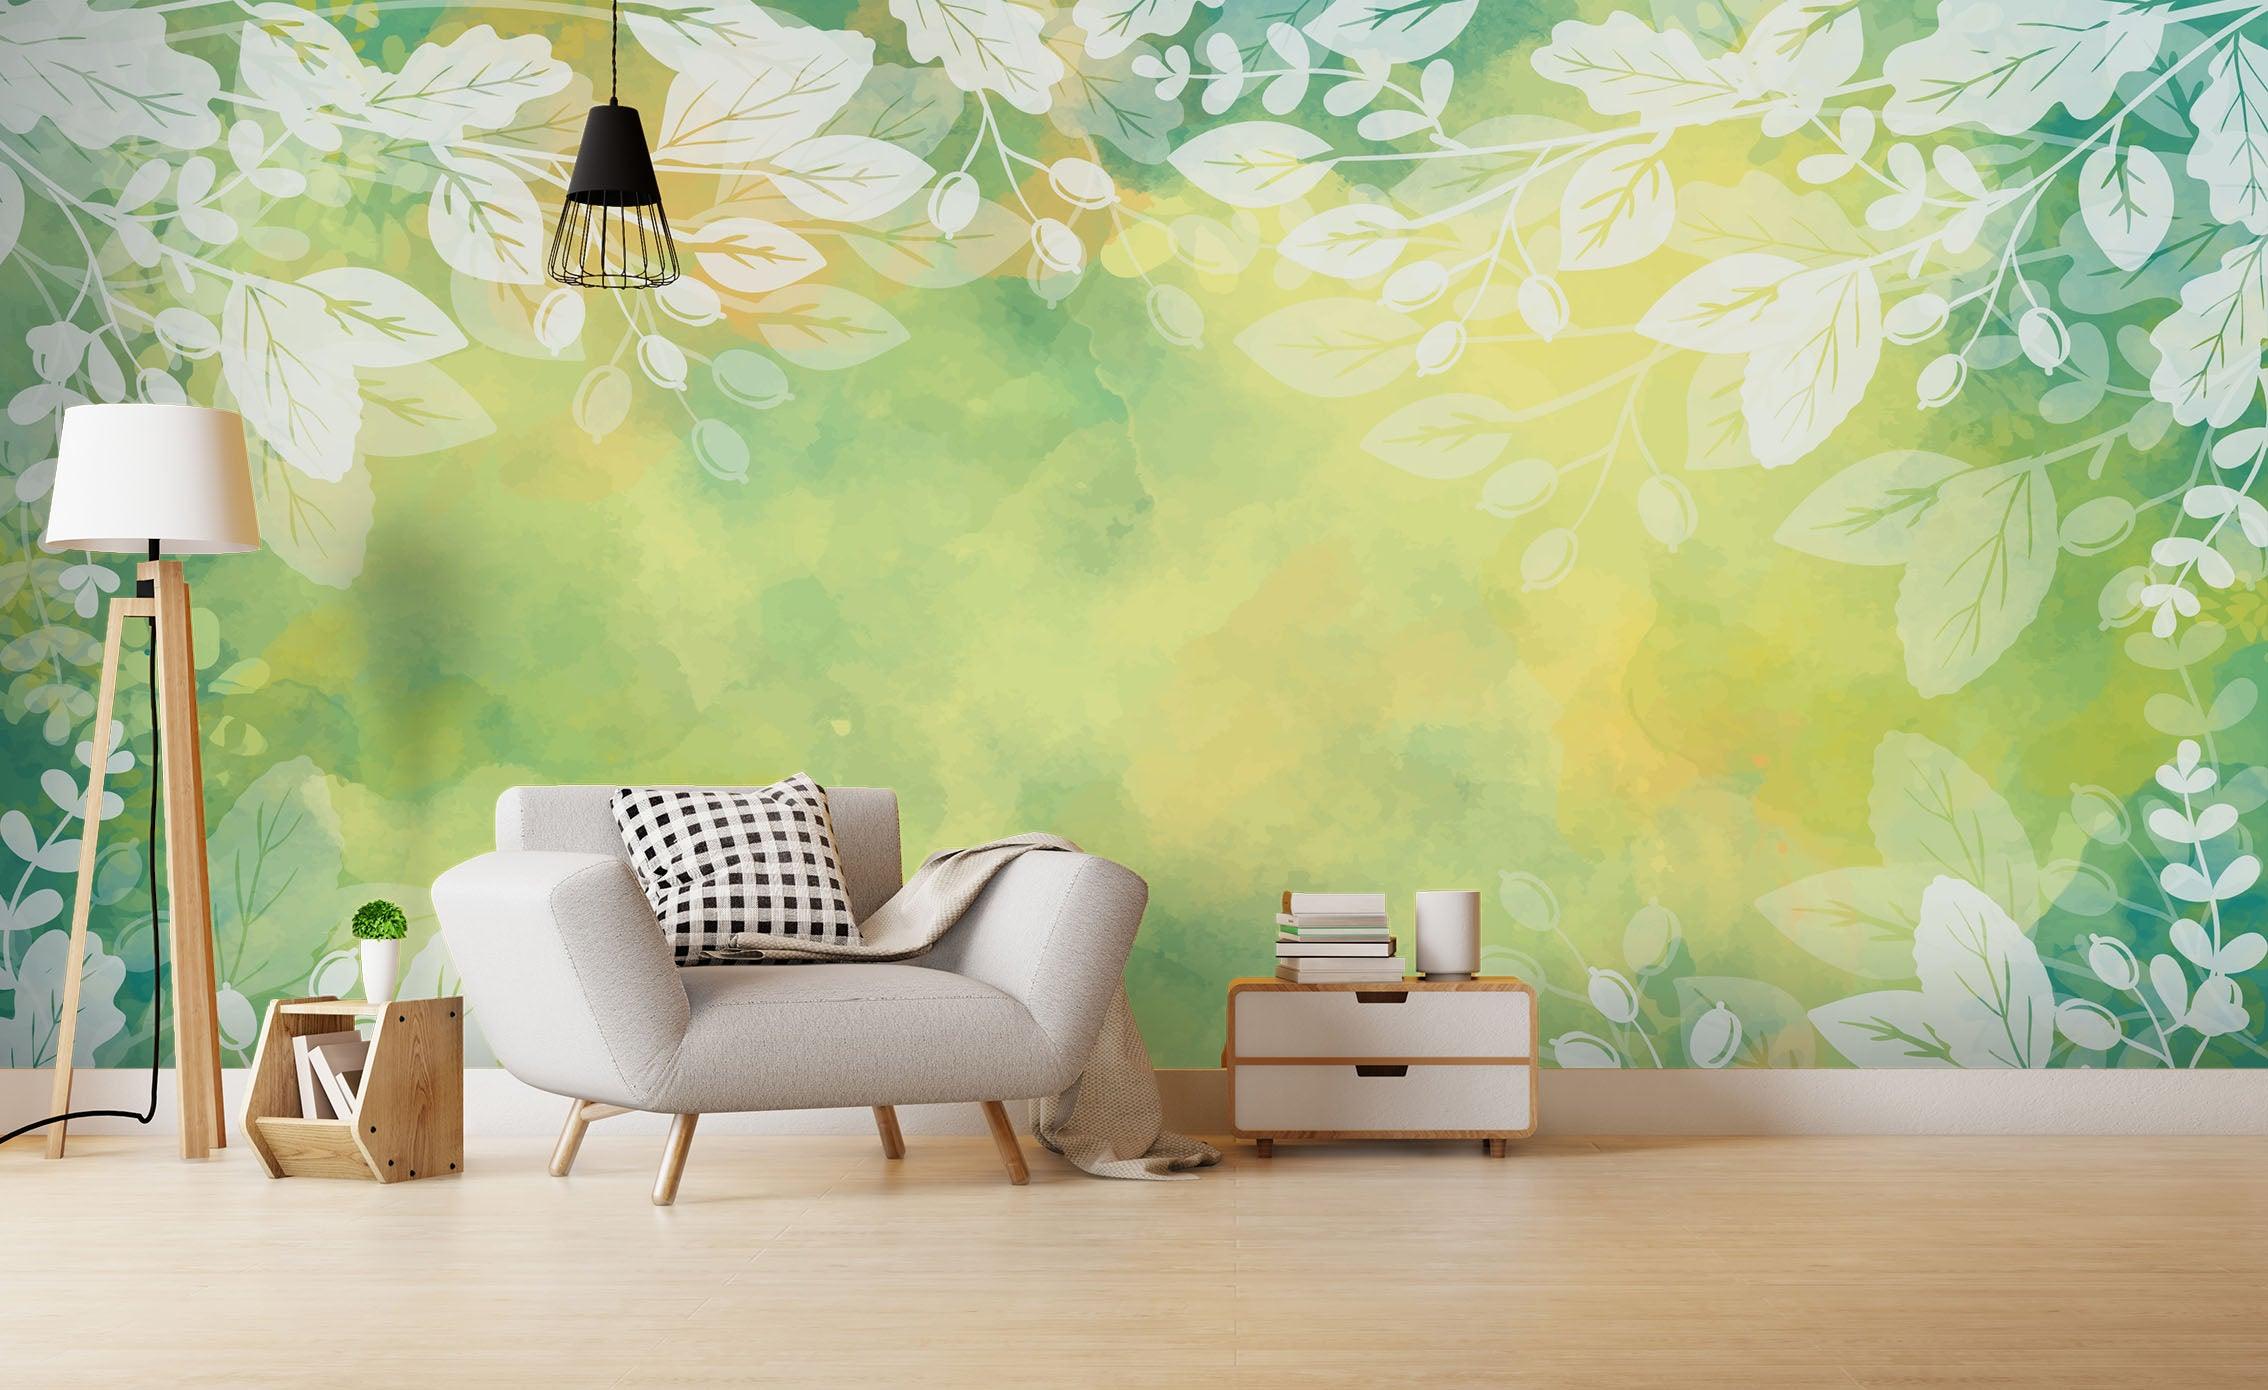 3D Hand Painted Green Leaves Wall Mural Wallpaper 80- Jess Art Decoration